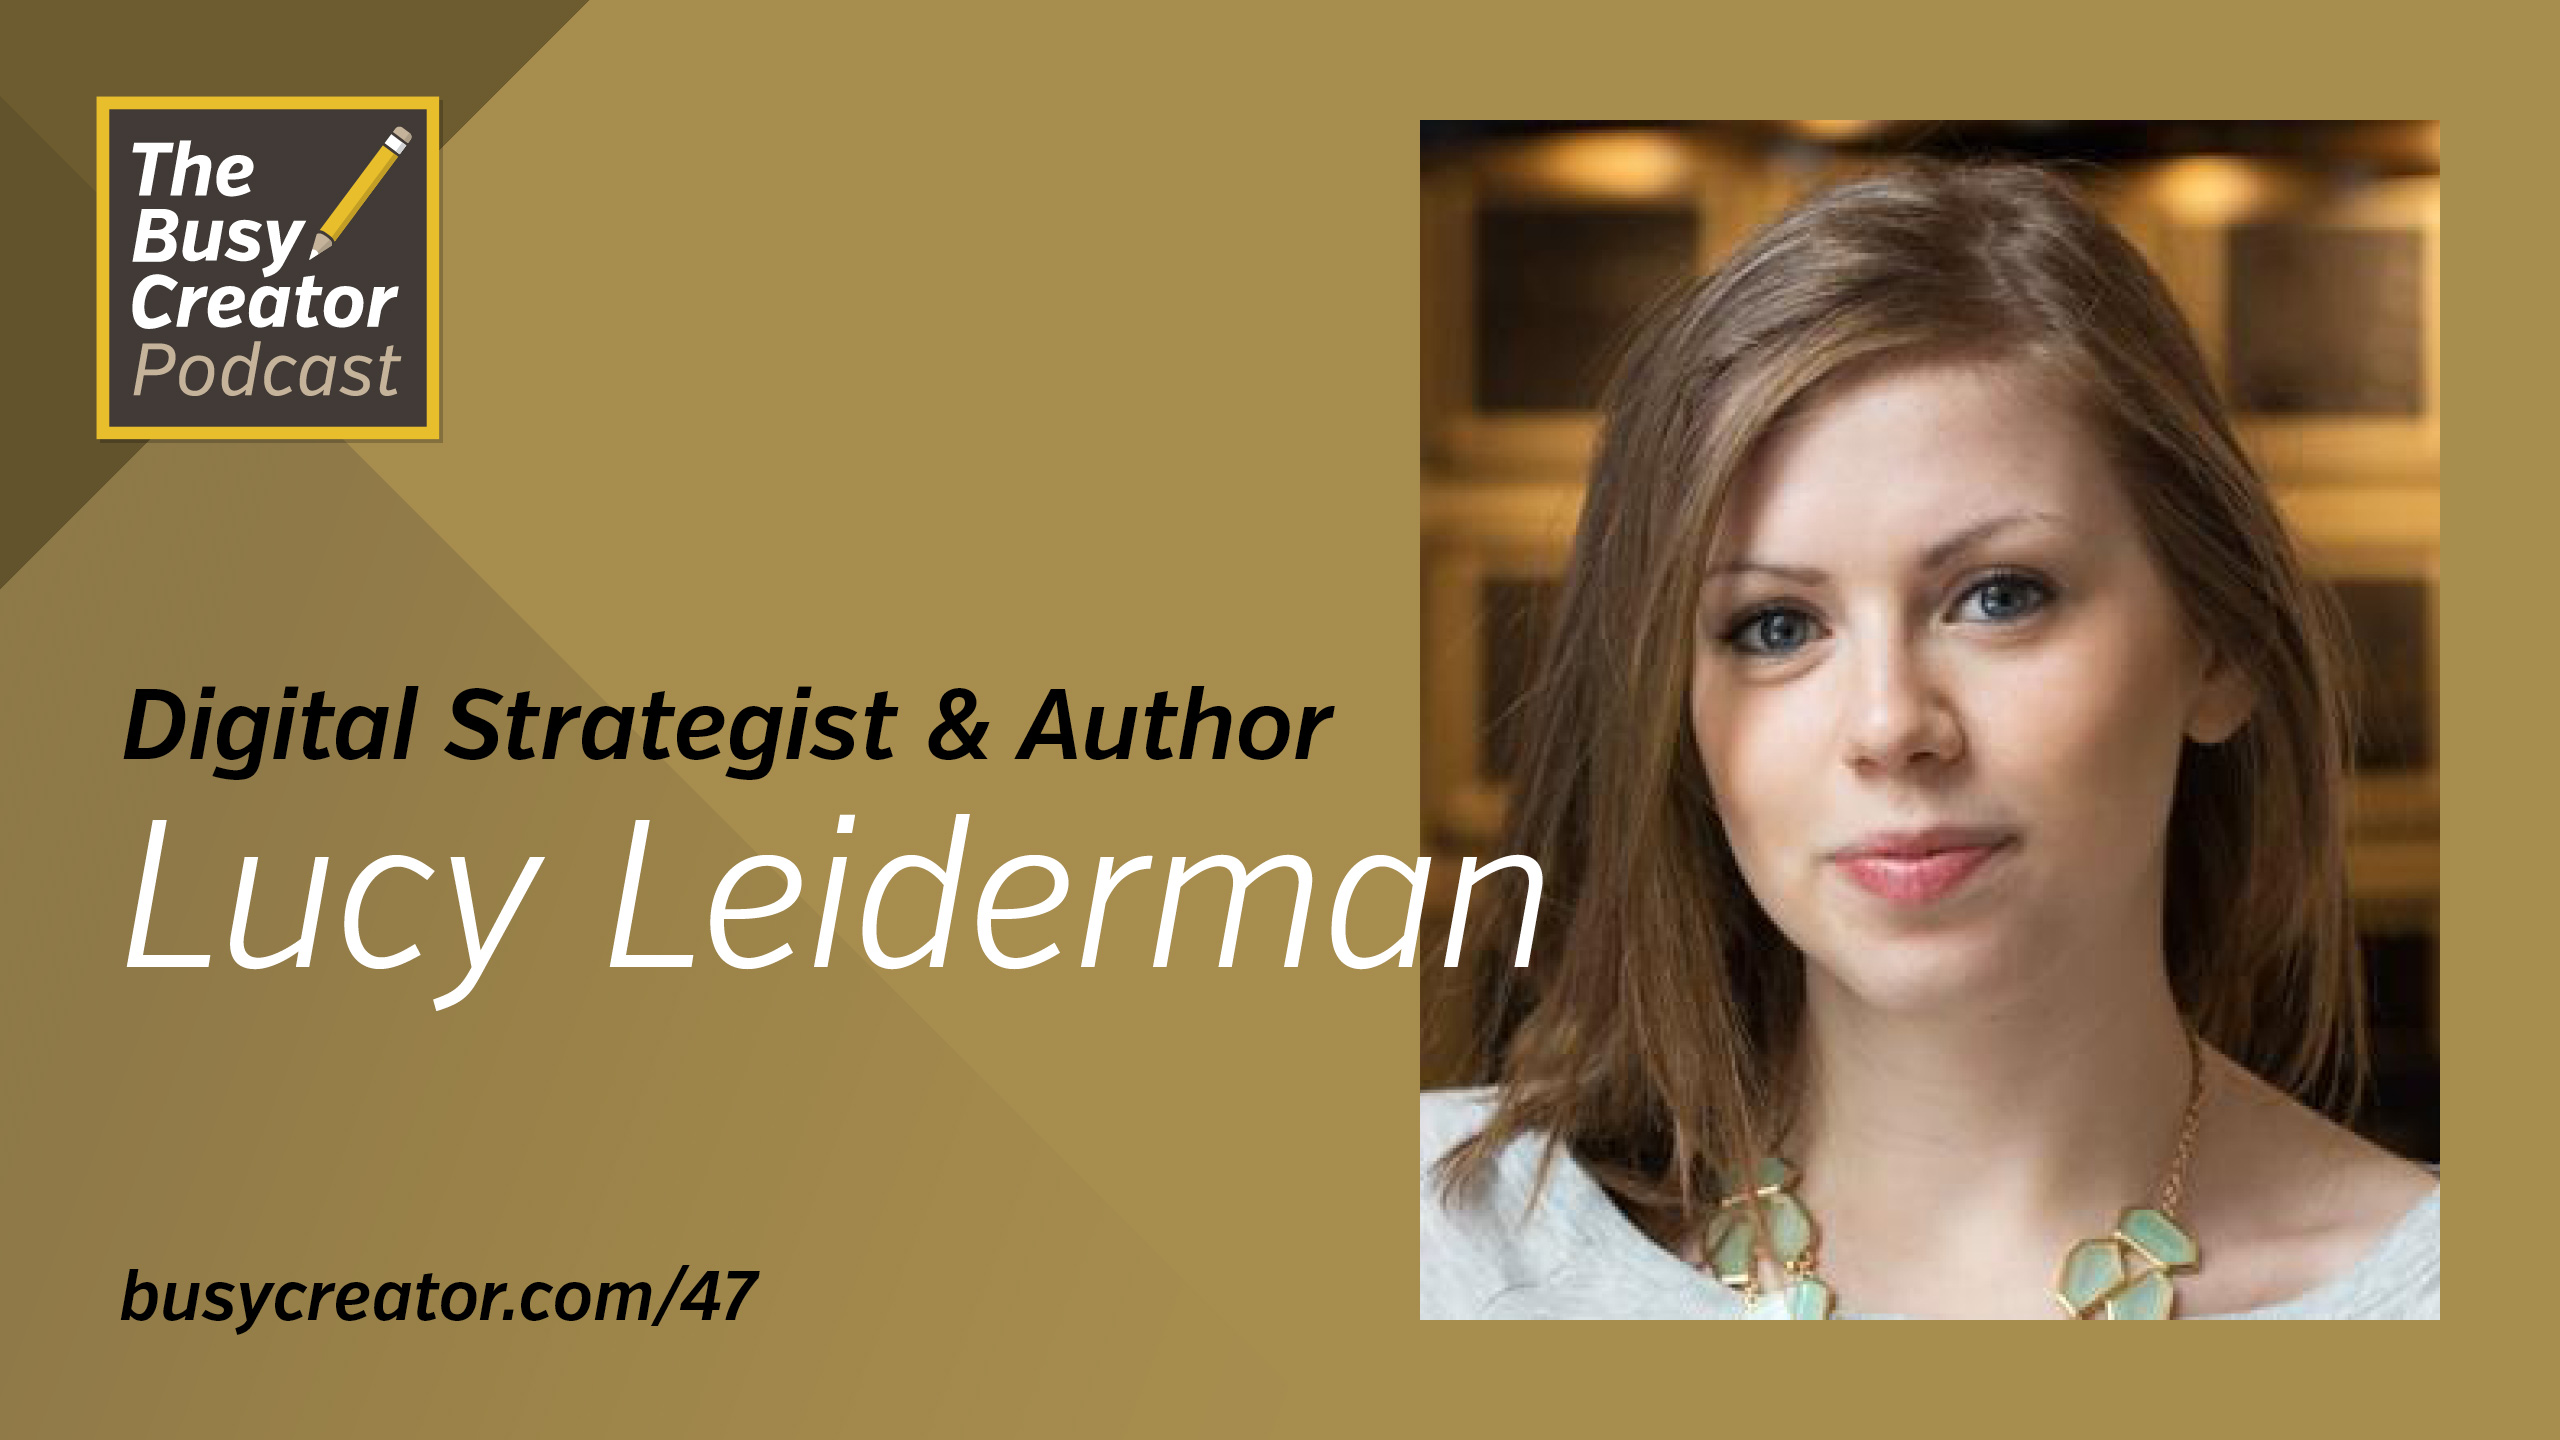 Managing Two Creative Pursuits with Digital Strategist & Novelist Lucy Leiderman